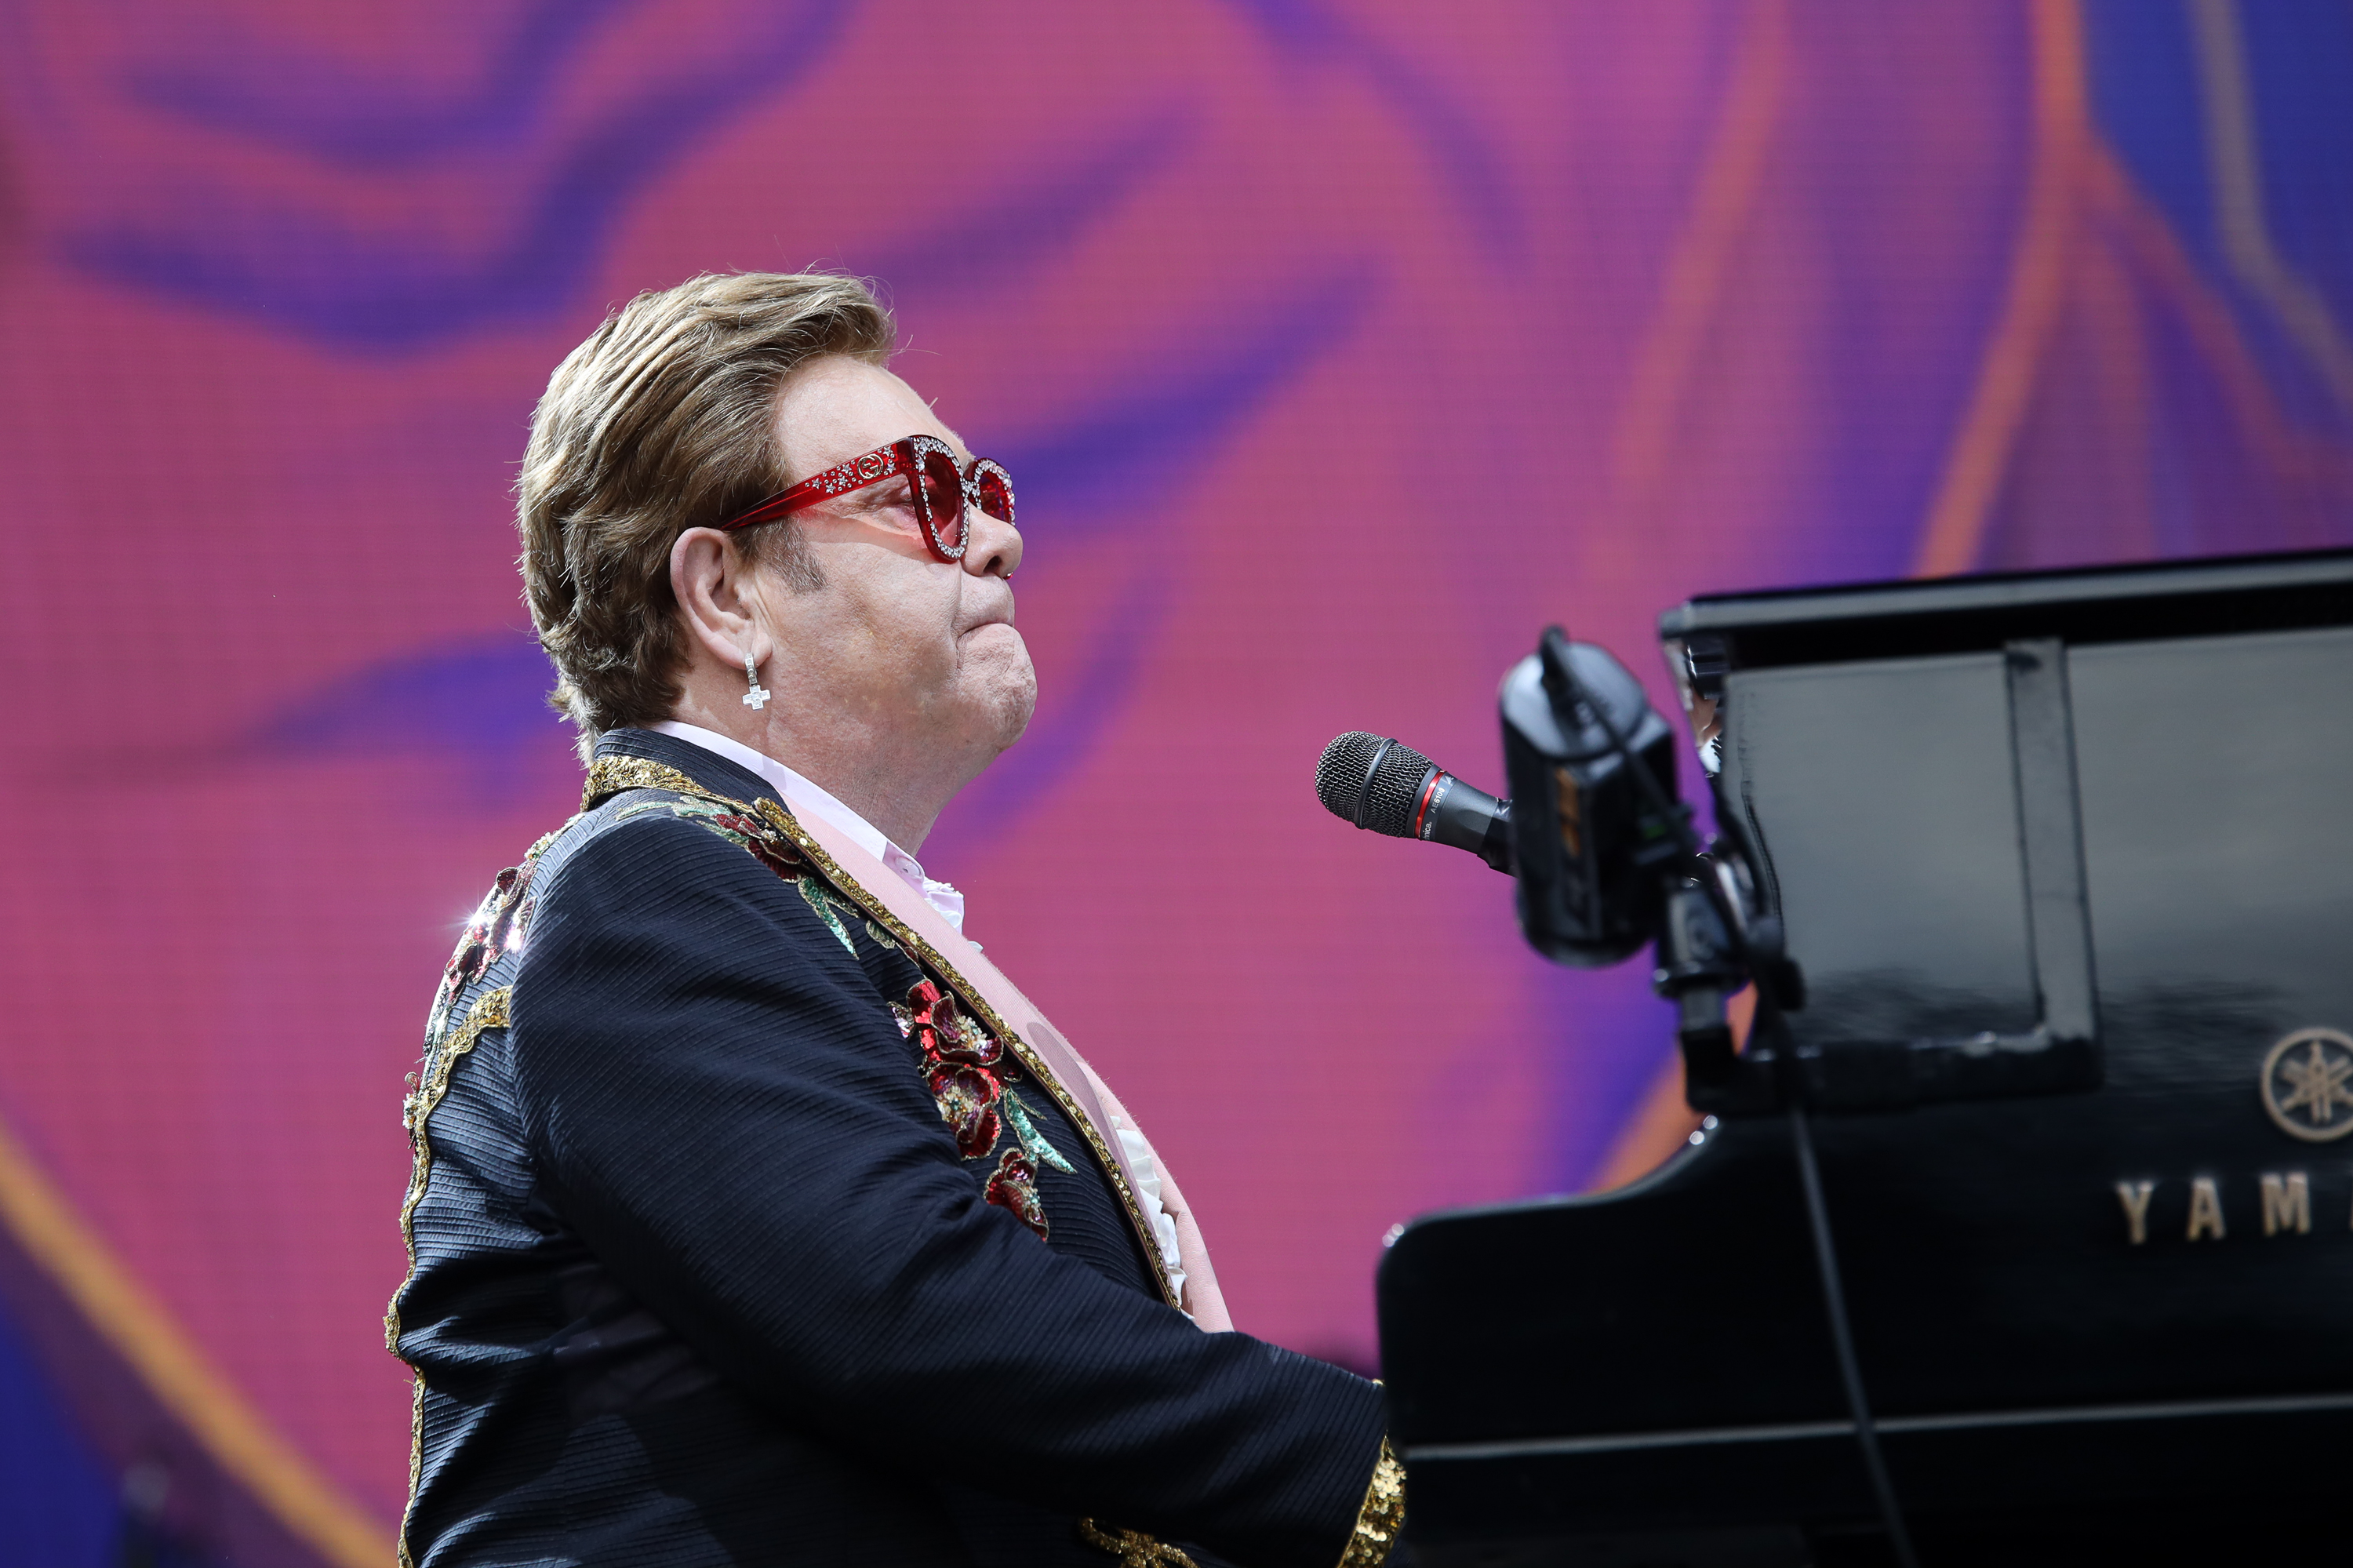 Elton John performs on February 16, 2020 | Source: Getty Images